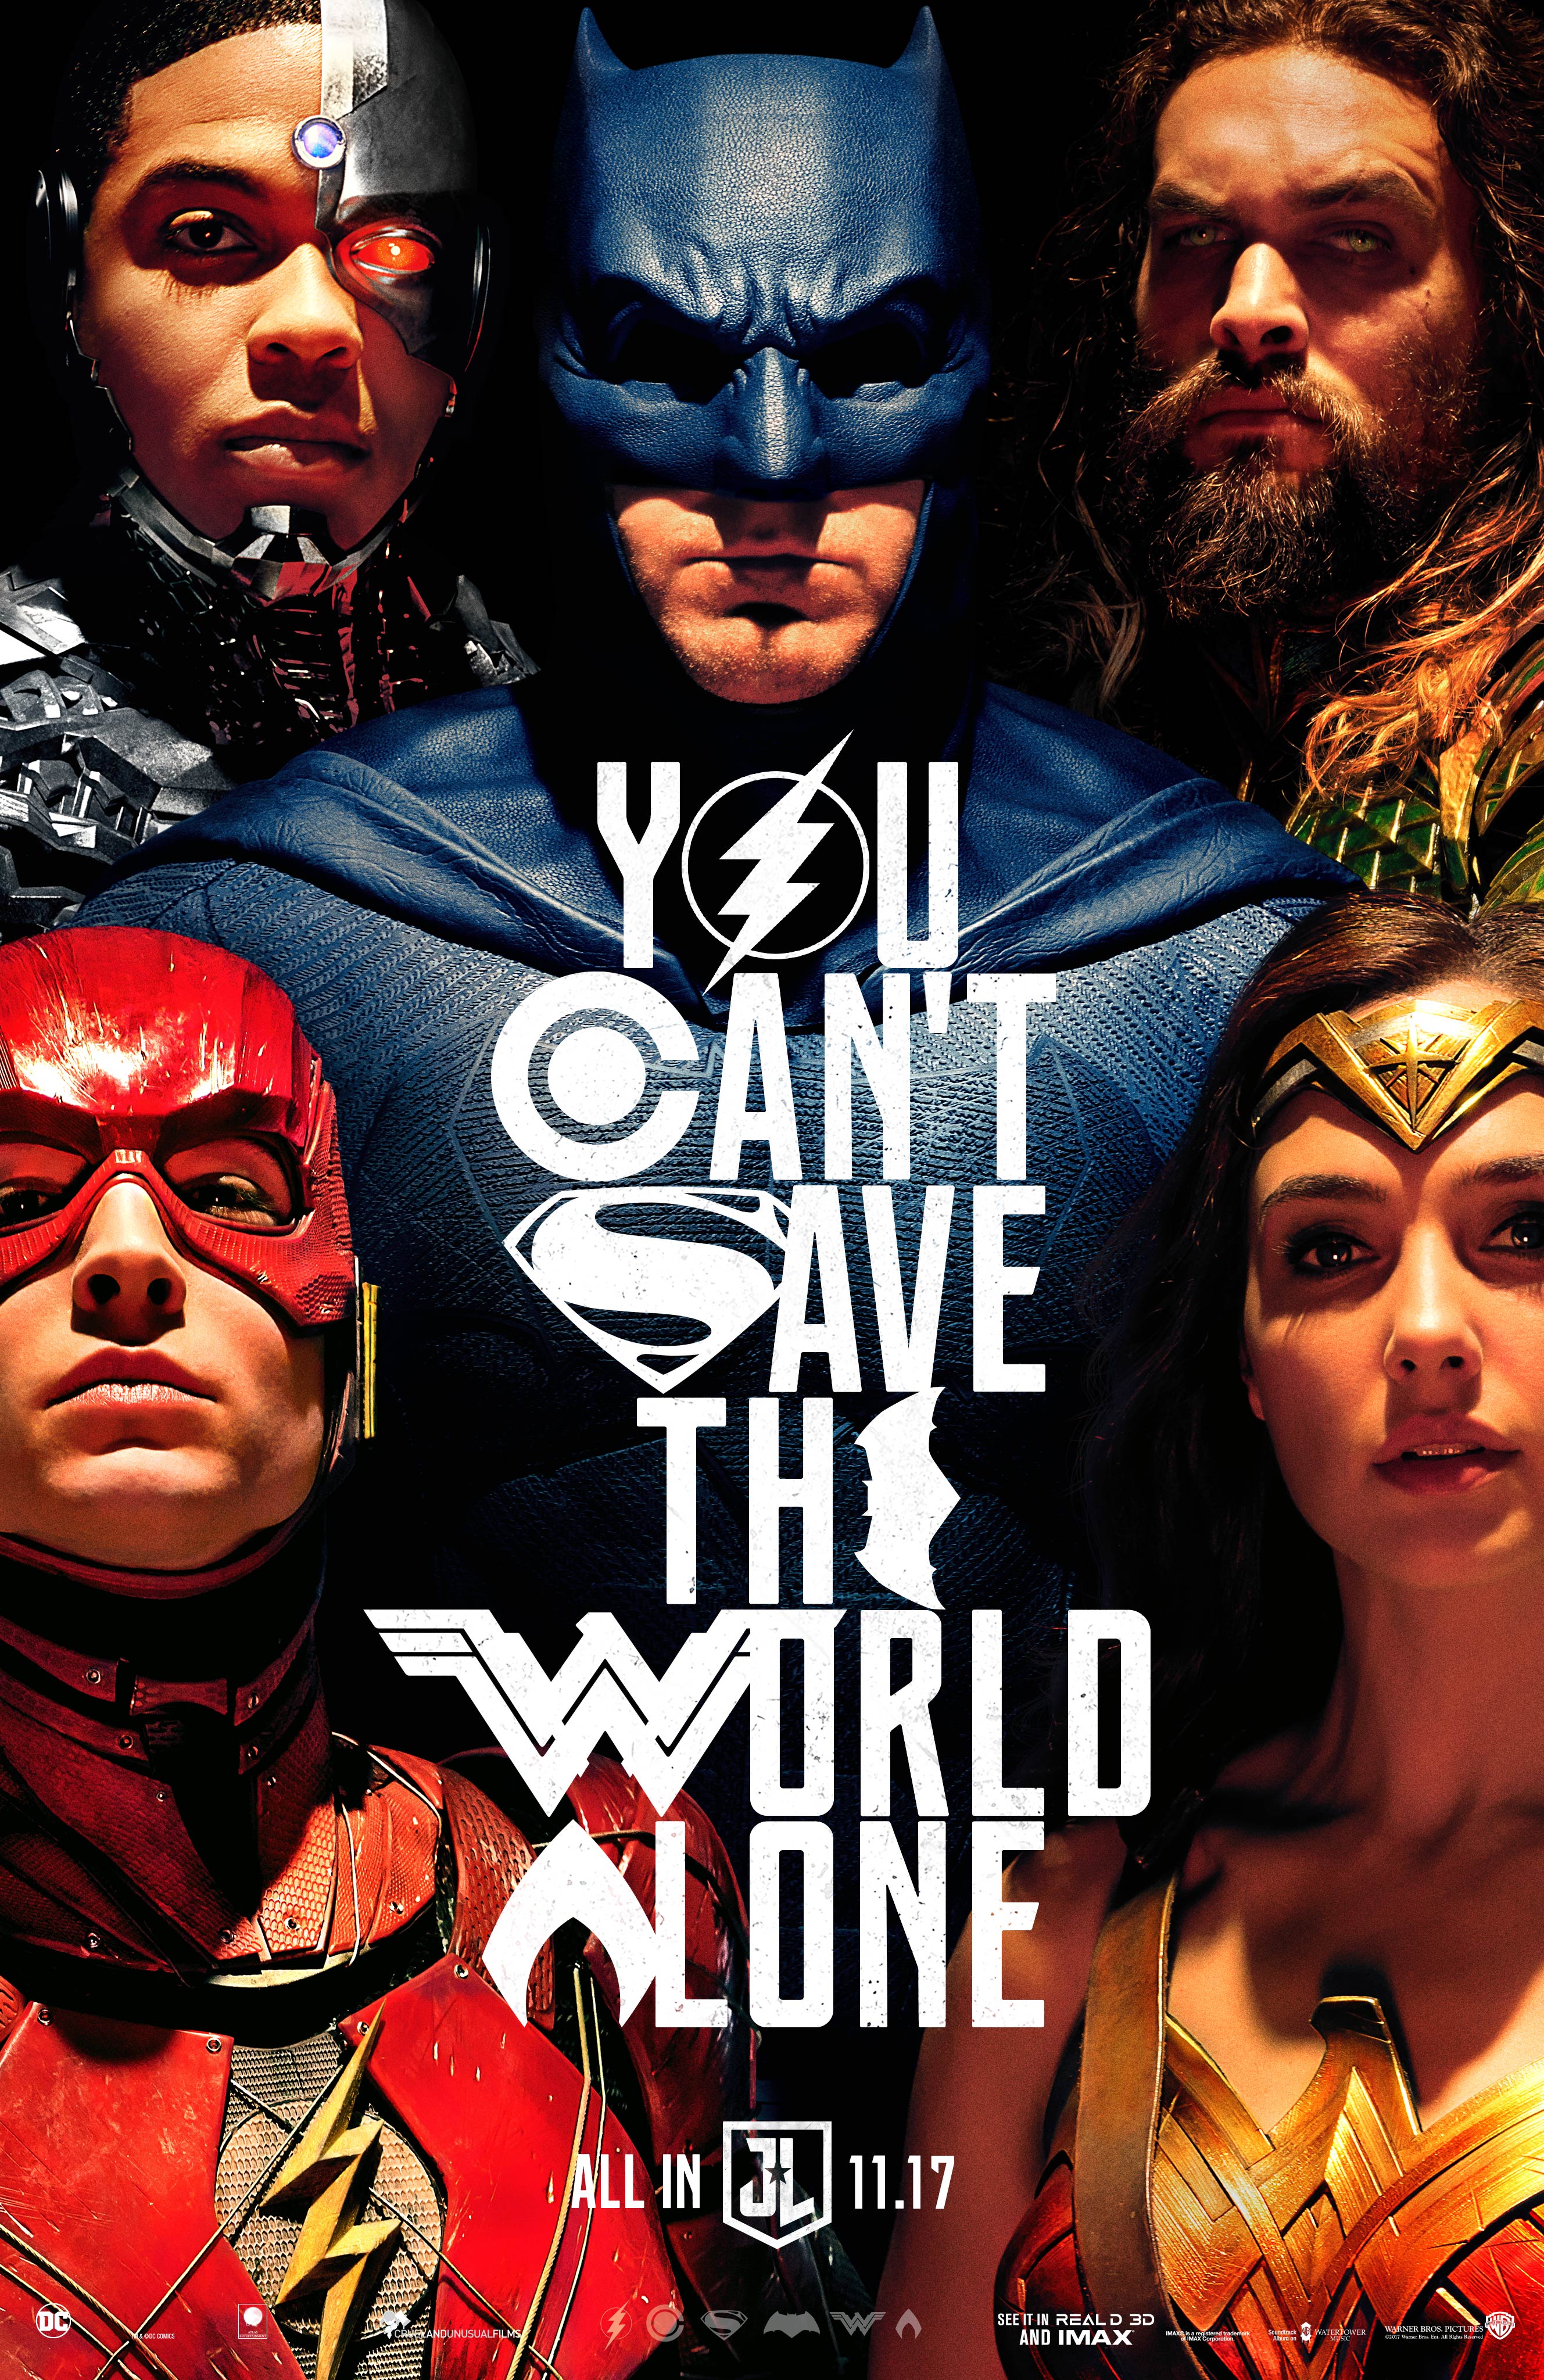 Who Would You Cast in the Upcoming Justice League Movie?